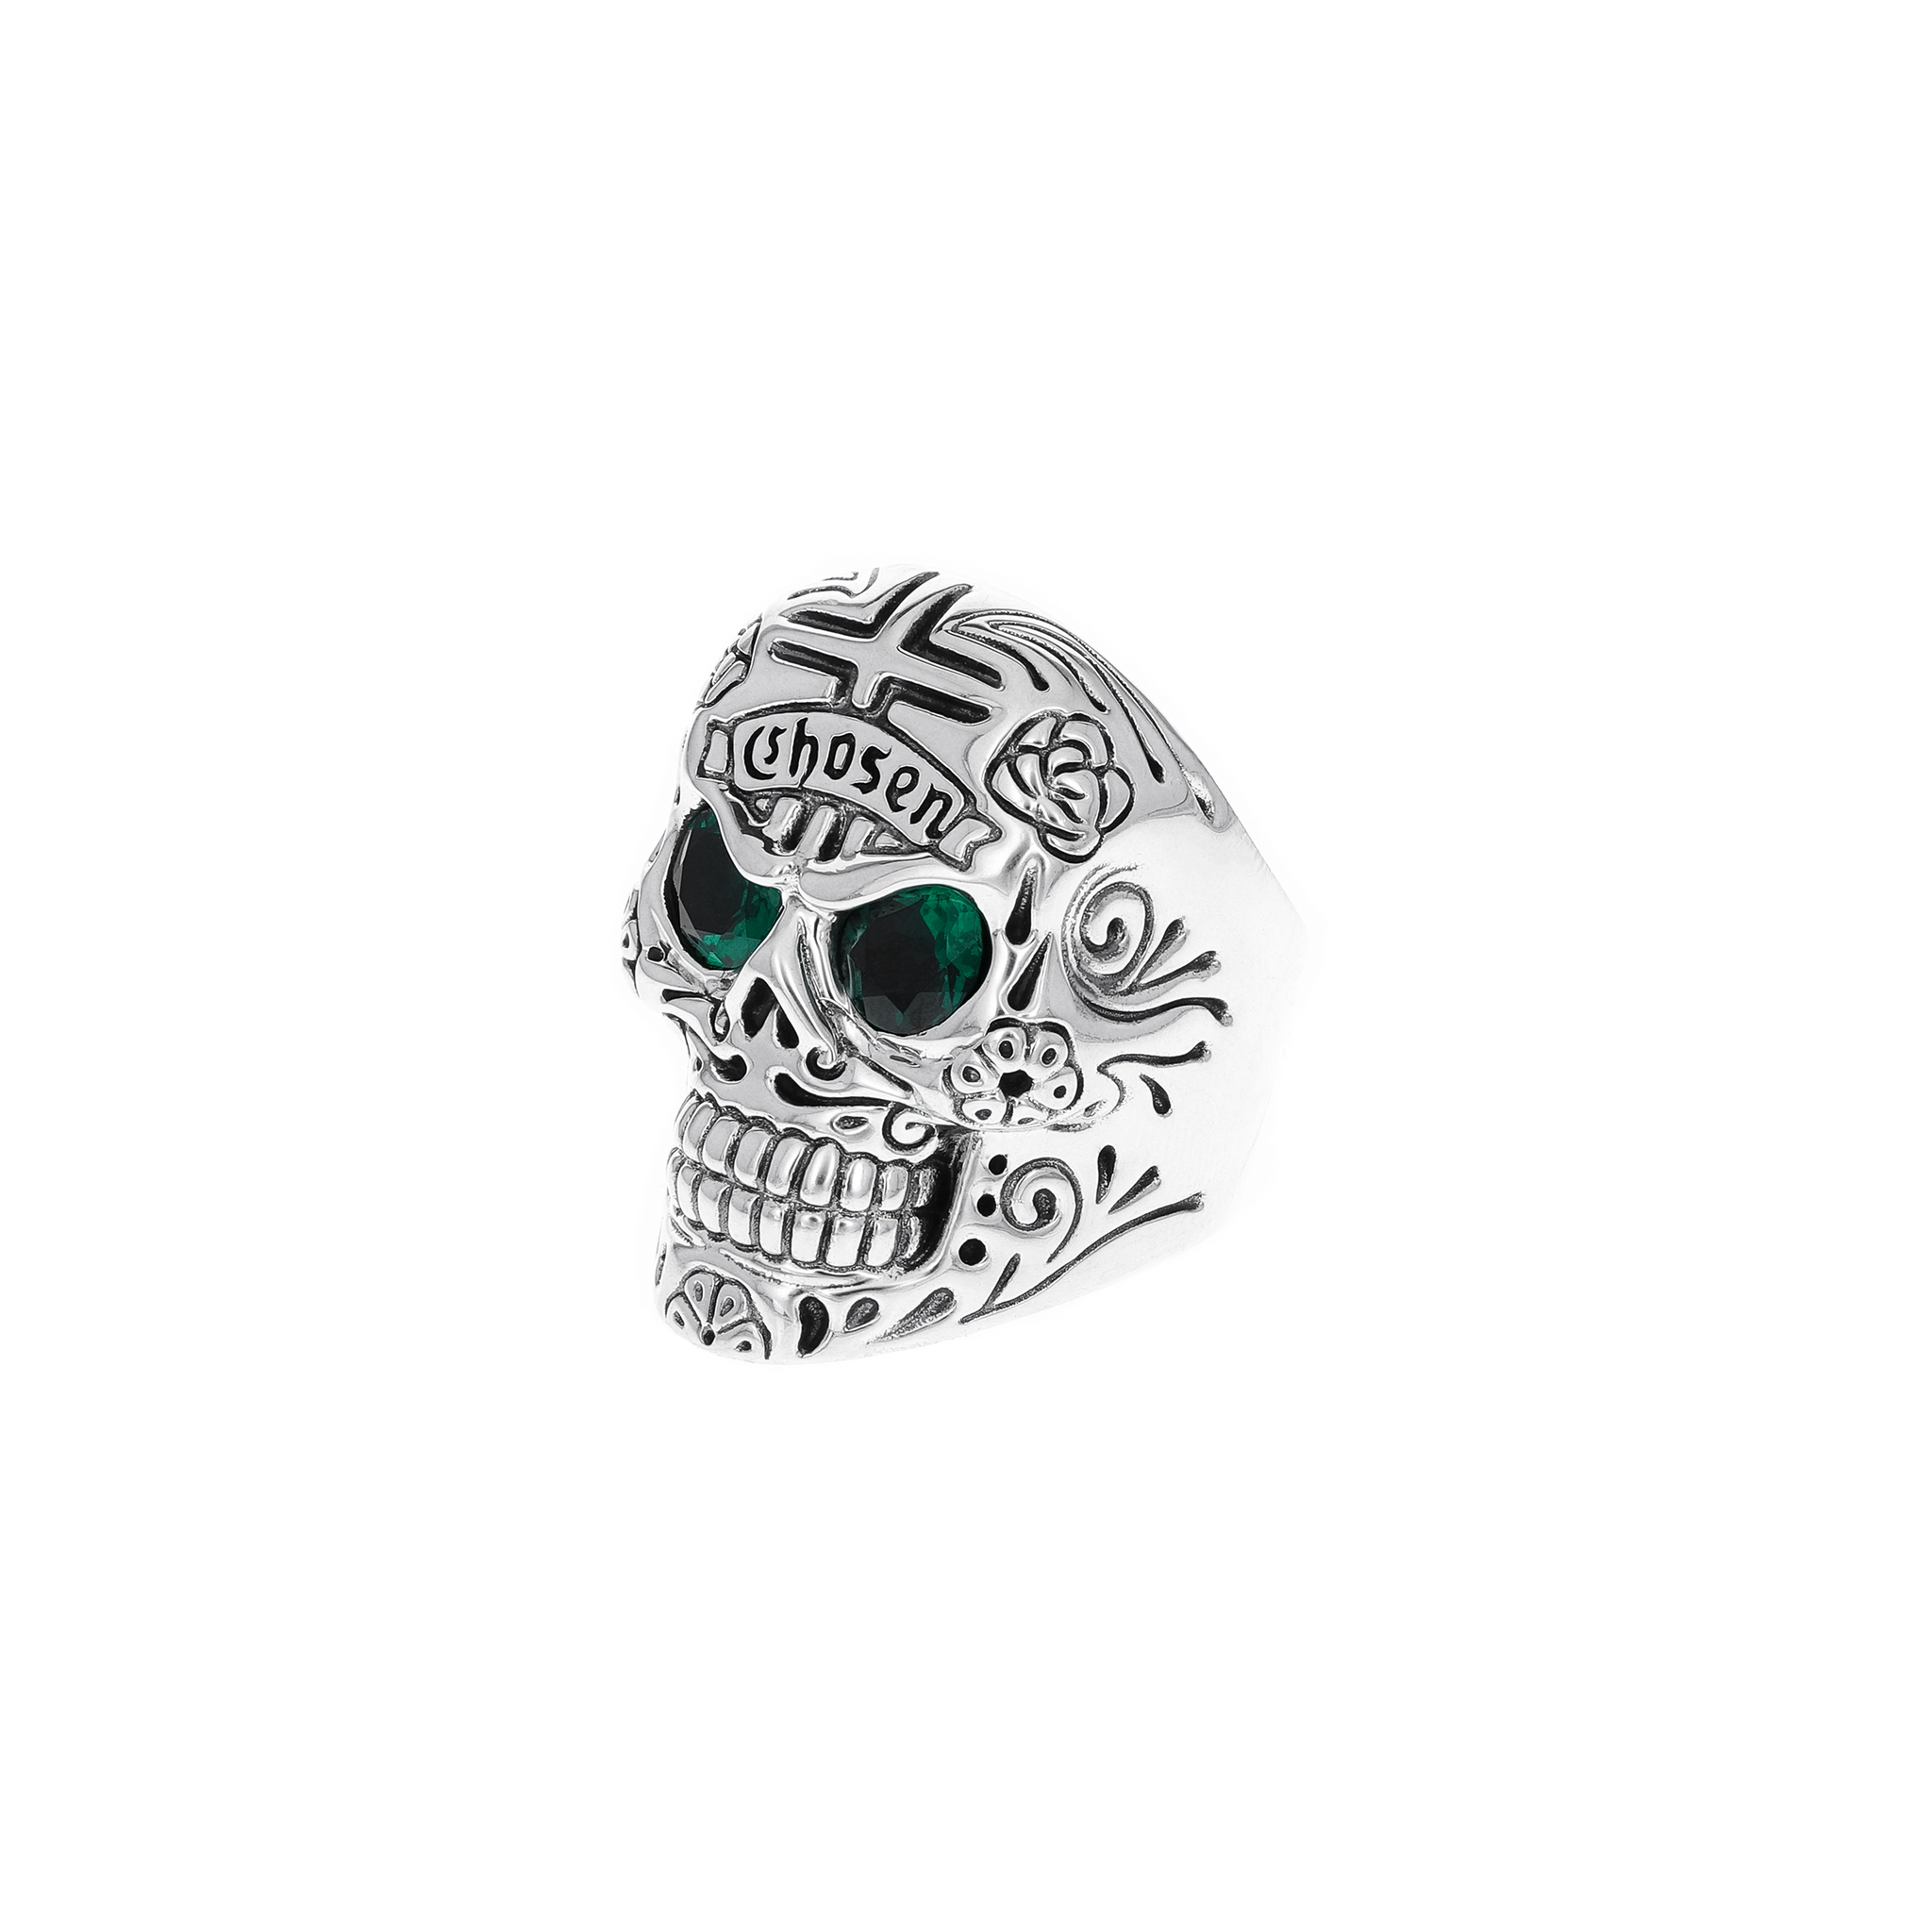 Large Skull Ring with Chosen Cross Detail and Green Emerald Eyes 3/4 view on white background